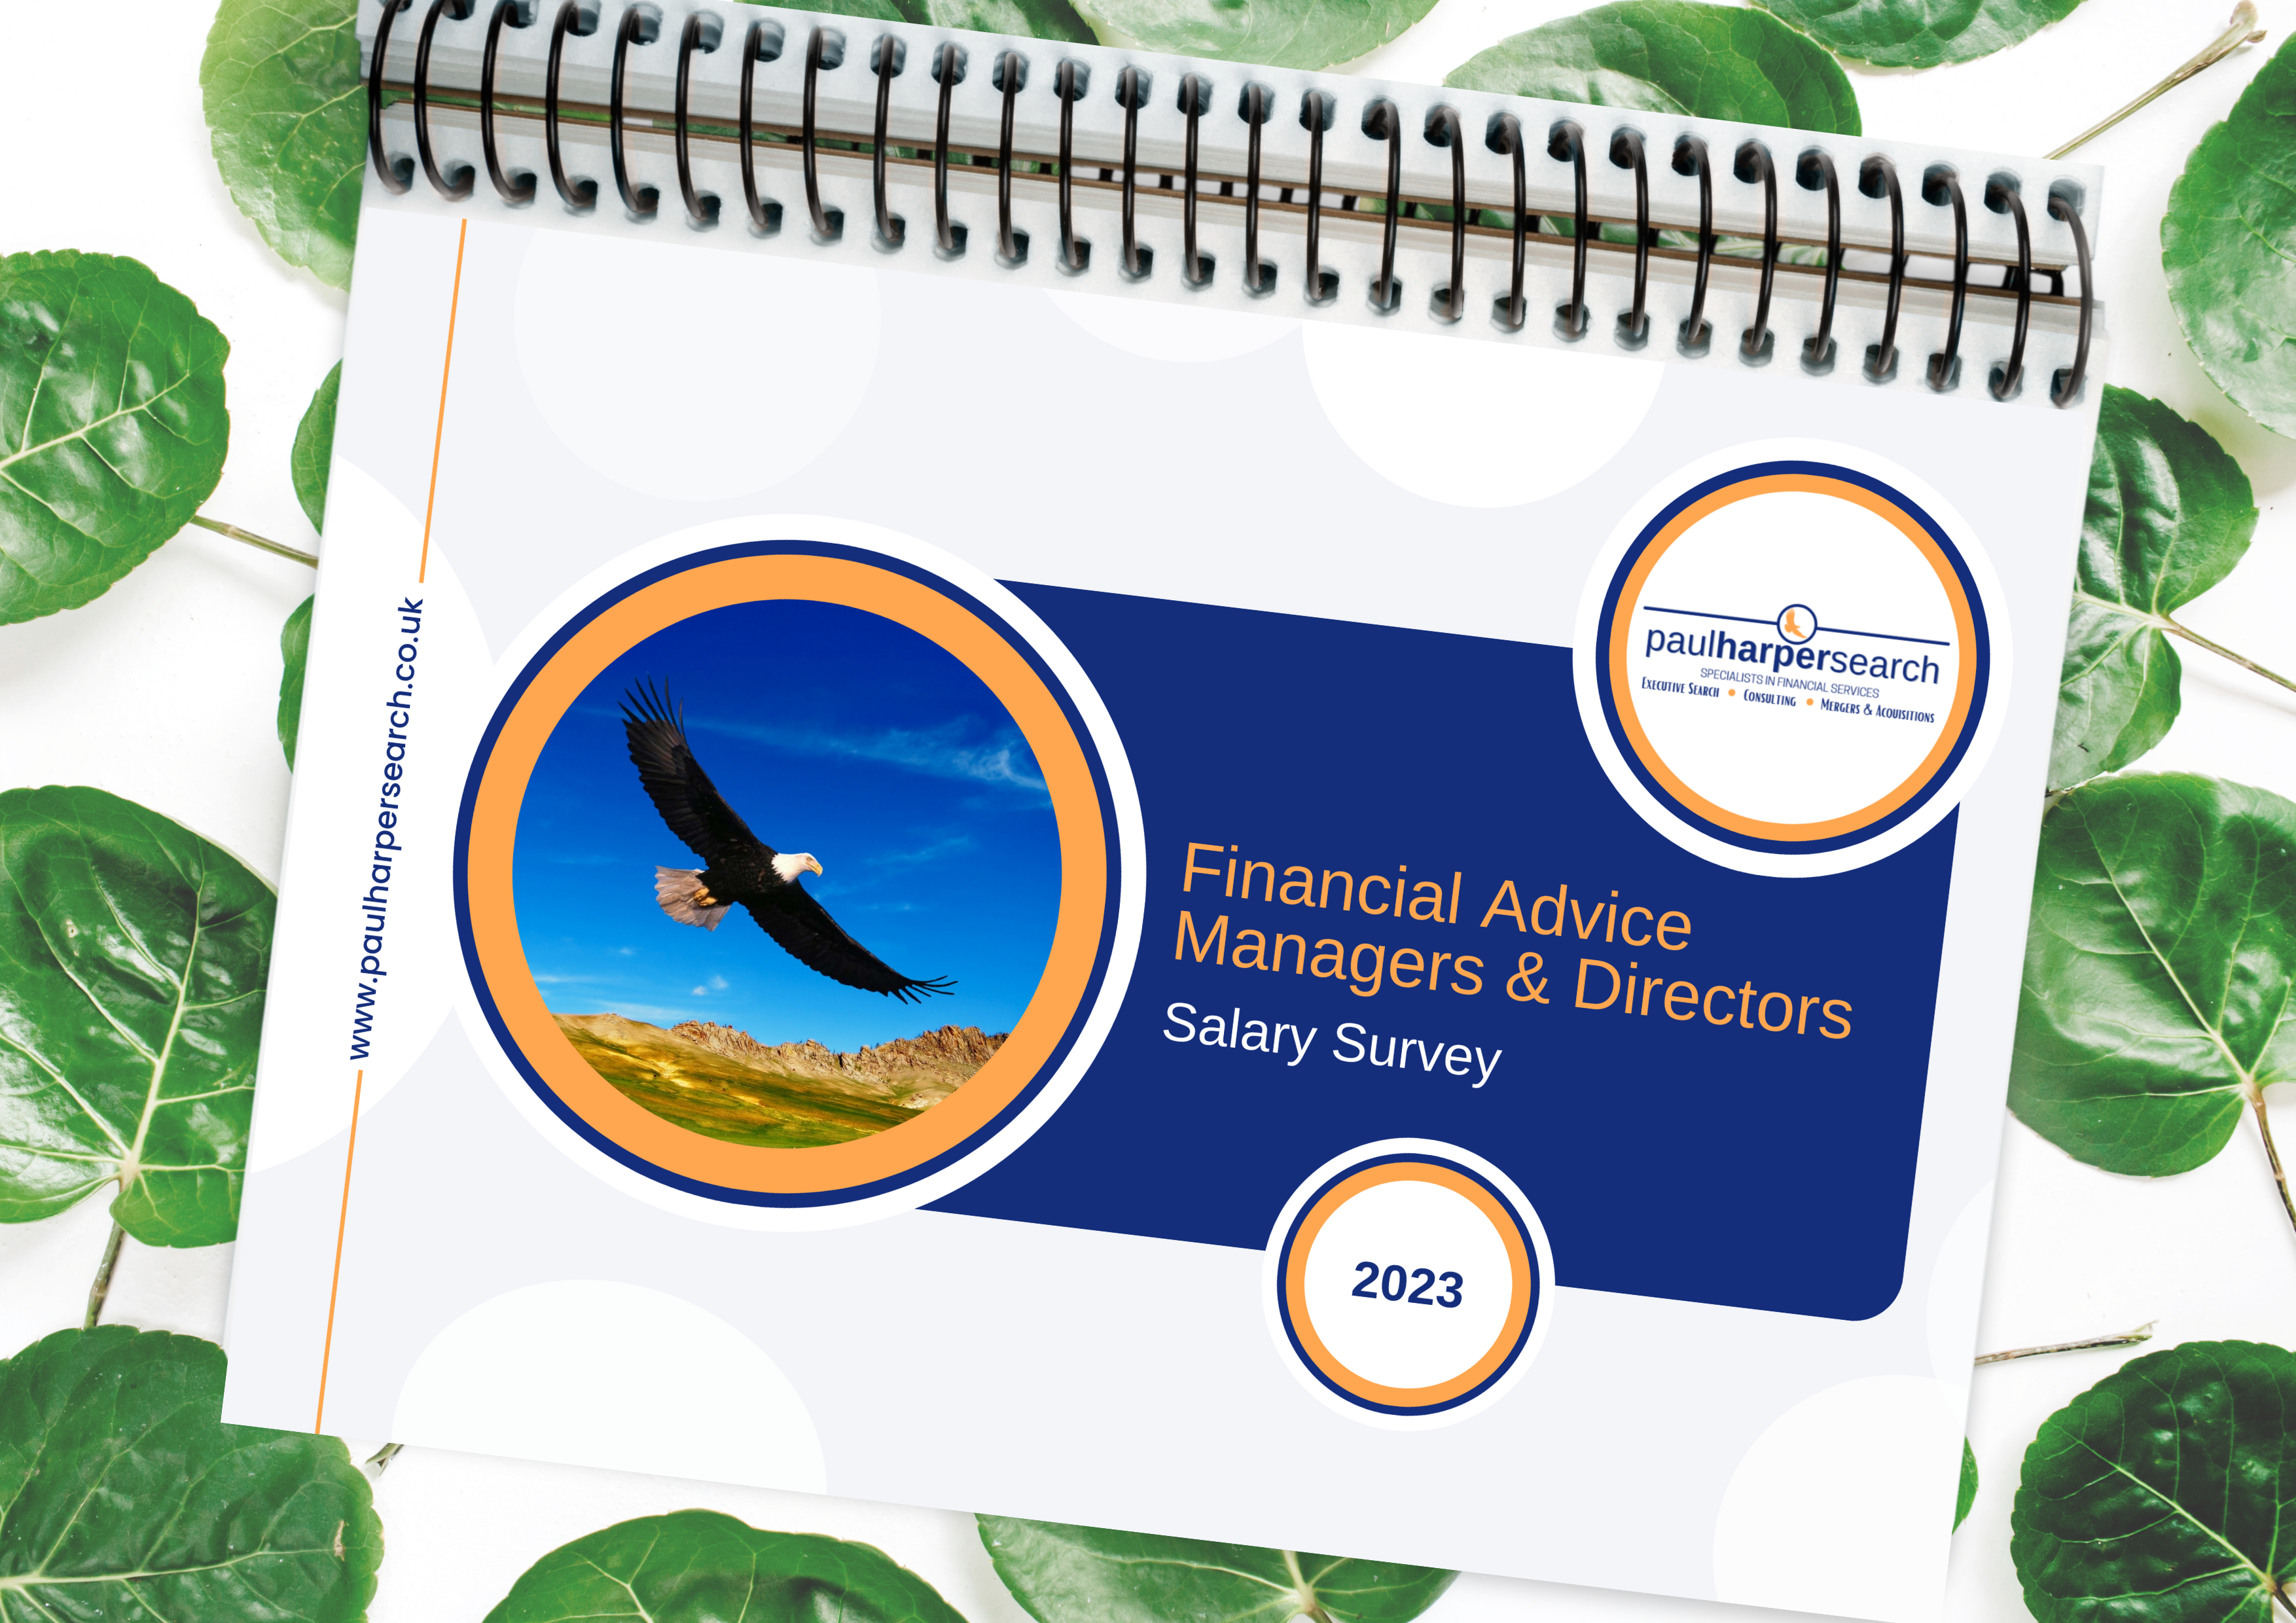 Financial Advice Managers & Directors Salary Survey 2023